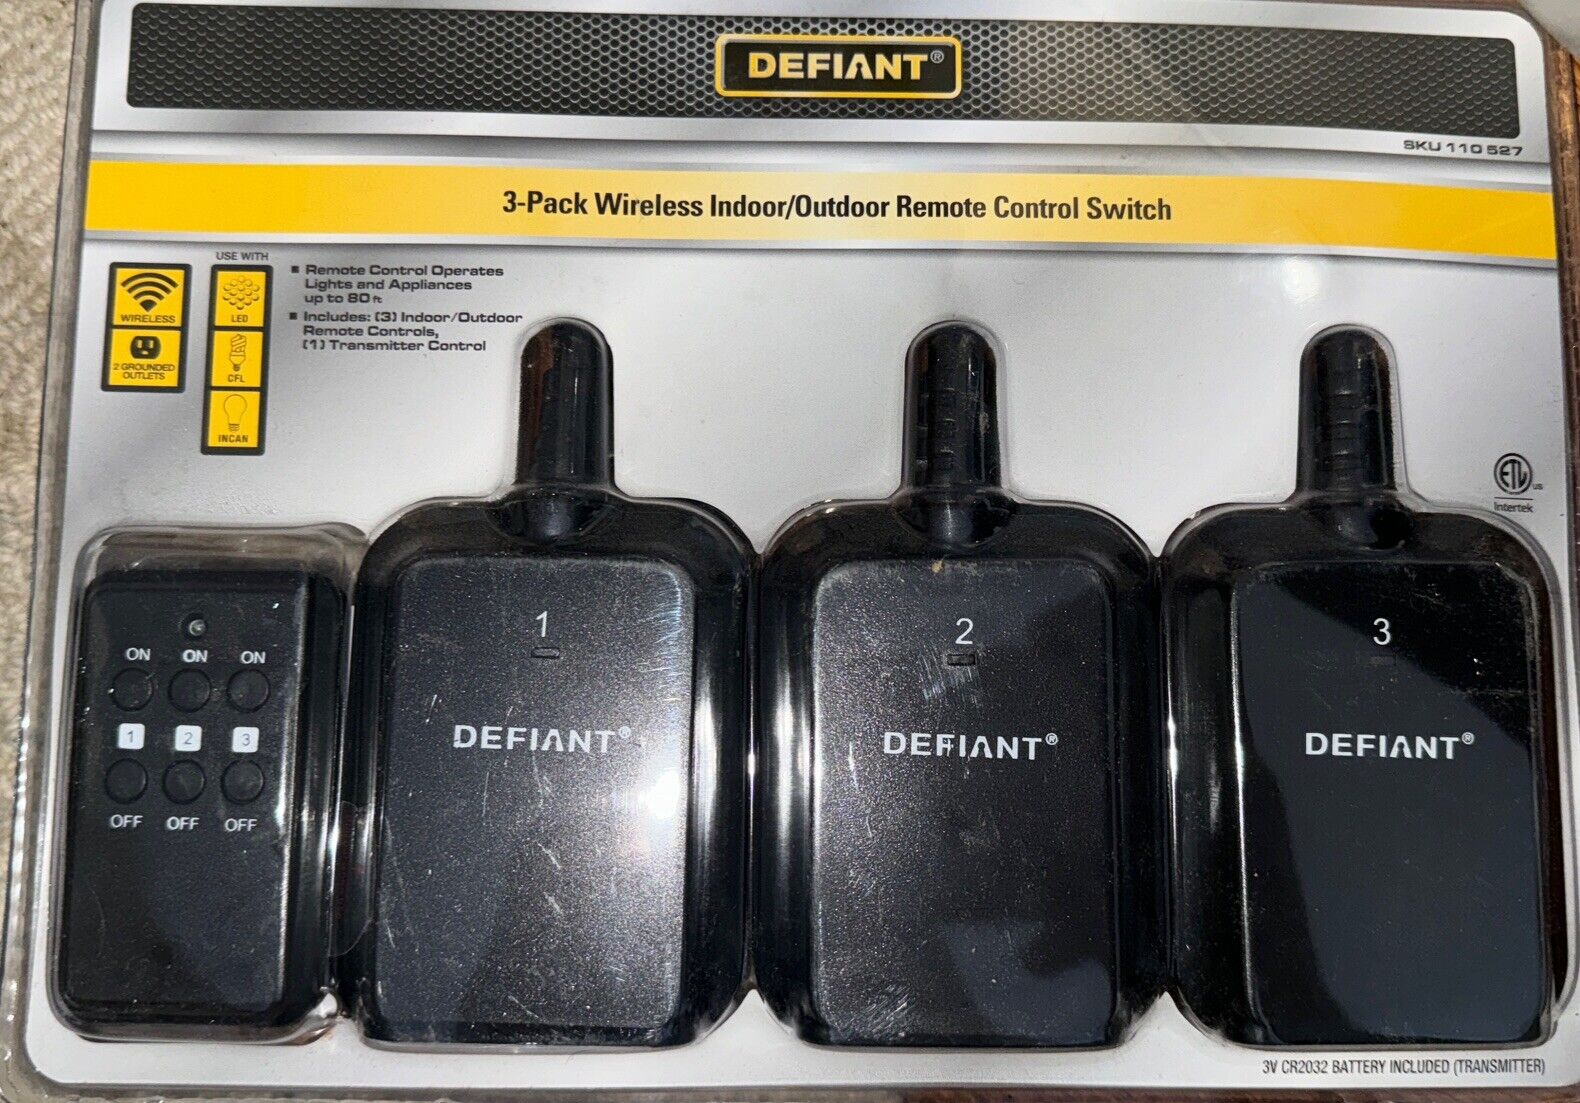 Defiant 3-Pack Wireless Indoor/Outdoor Remote Control Switch